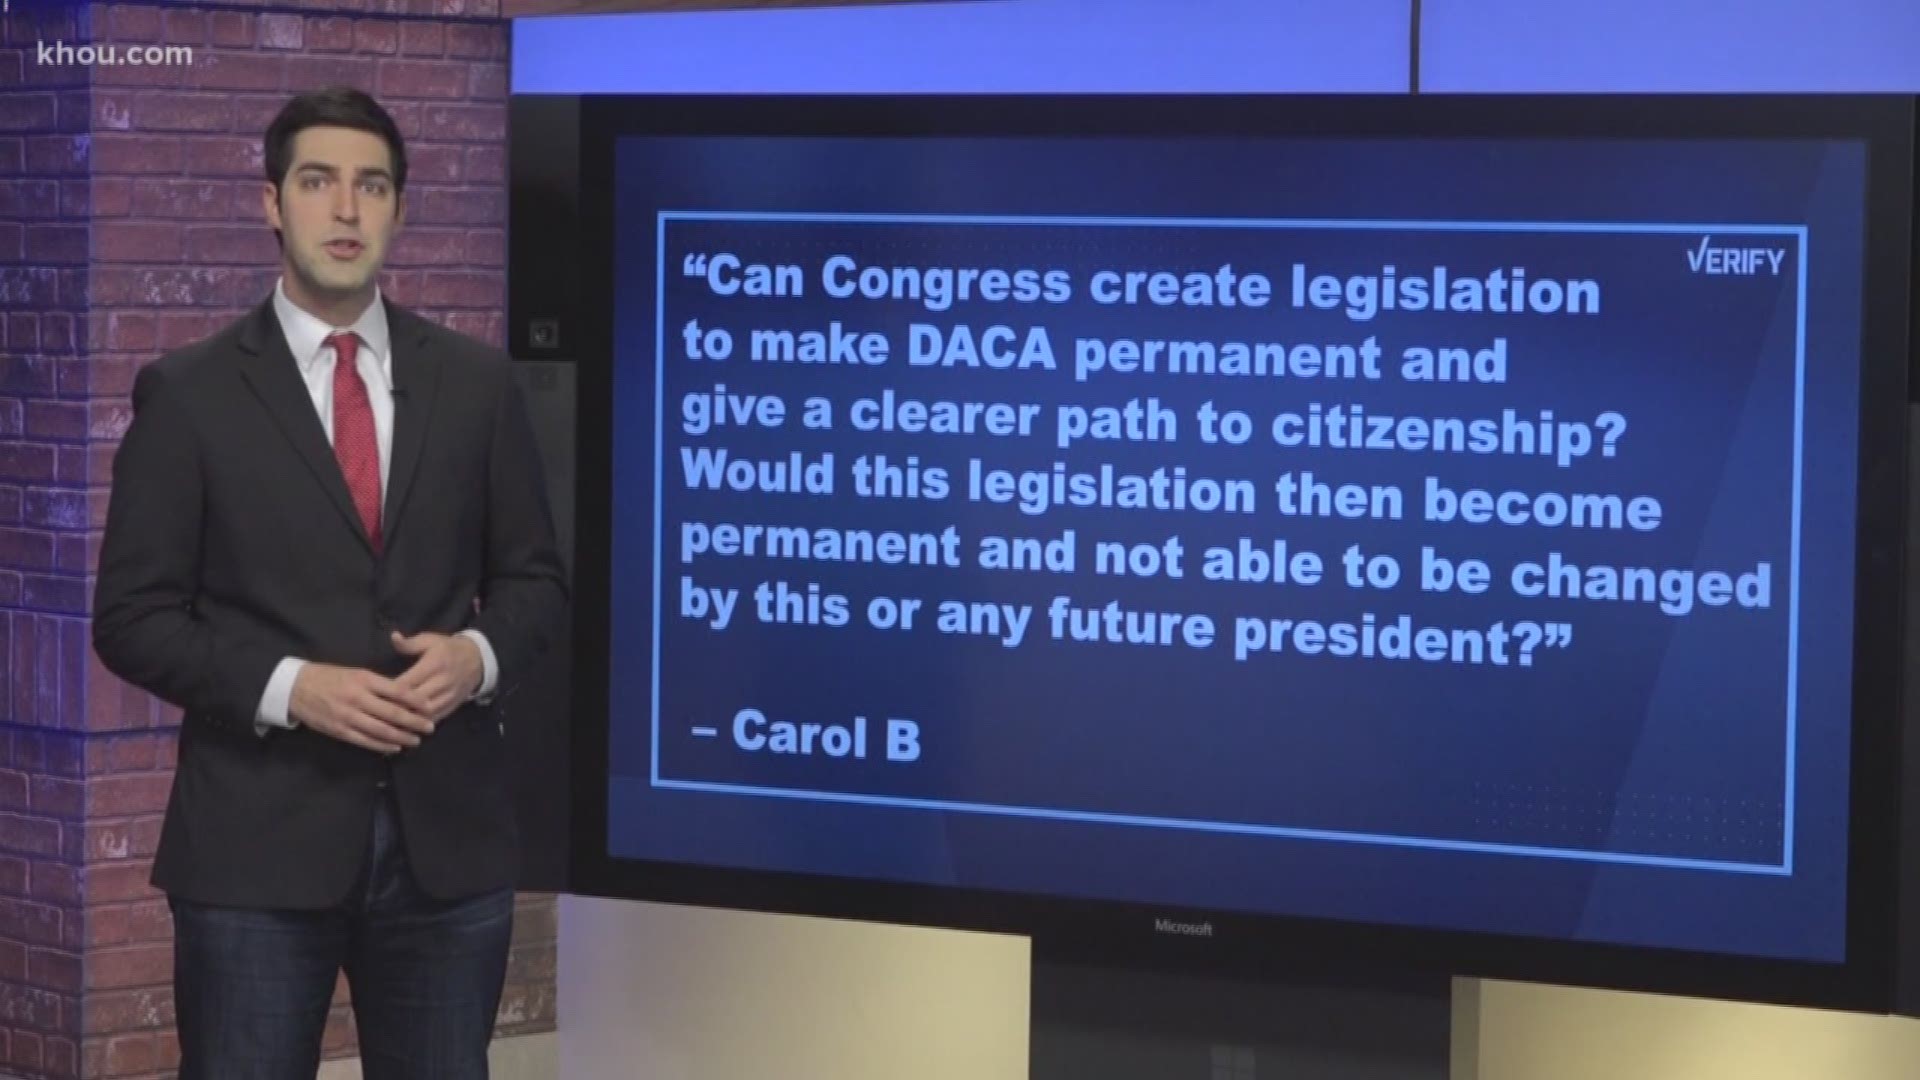 A viewer sent in a question about the future of DACA after President Trump offered to restore protections for children brought to the U.S. illegally.